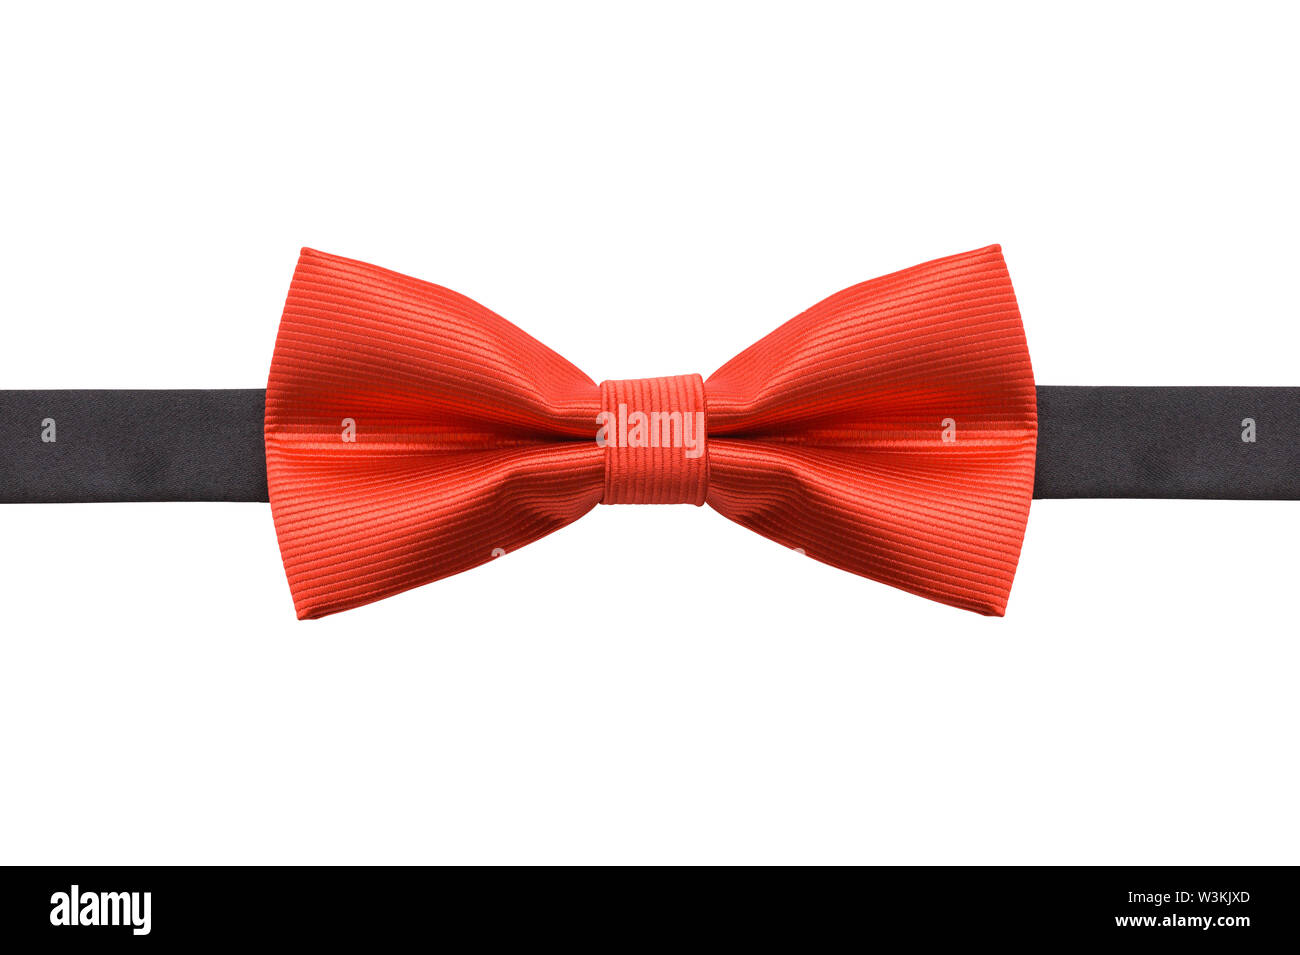 Red Bow Tie with Black Strap Isolated on White. Stock Photo